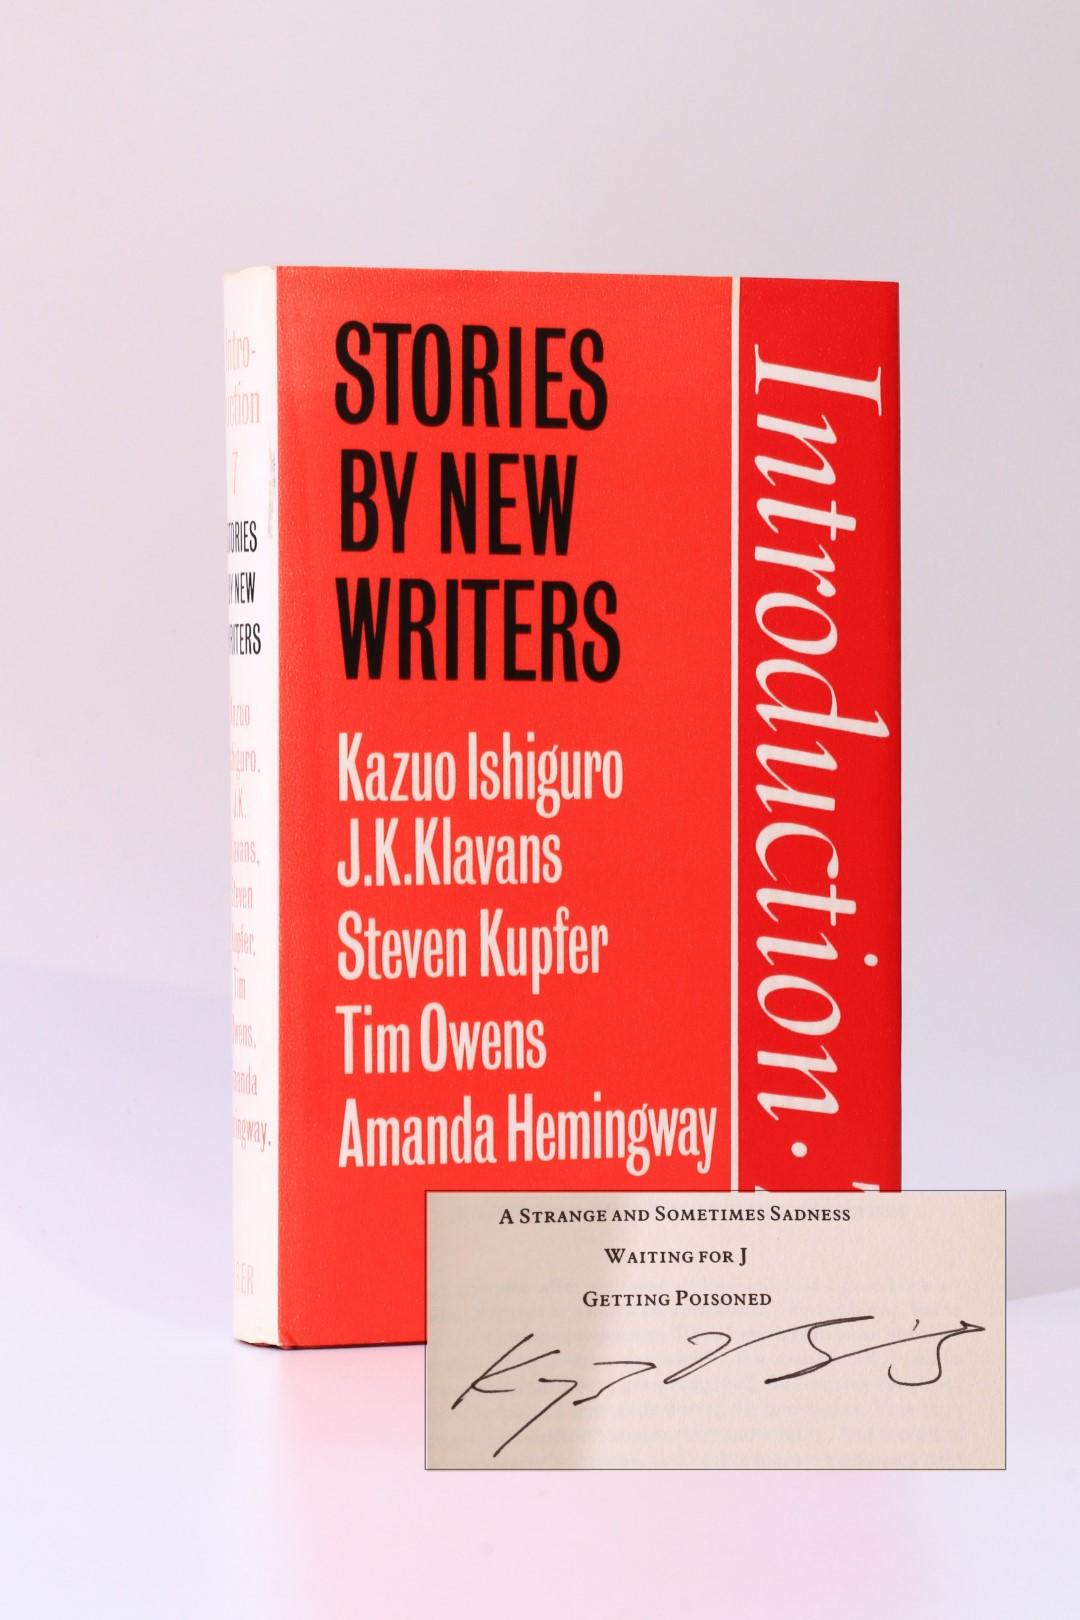 Kazuo Ishiguro - Introductions 7 - Stories by New Writers - Faber & Faber, 1981, Signed First Edition.